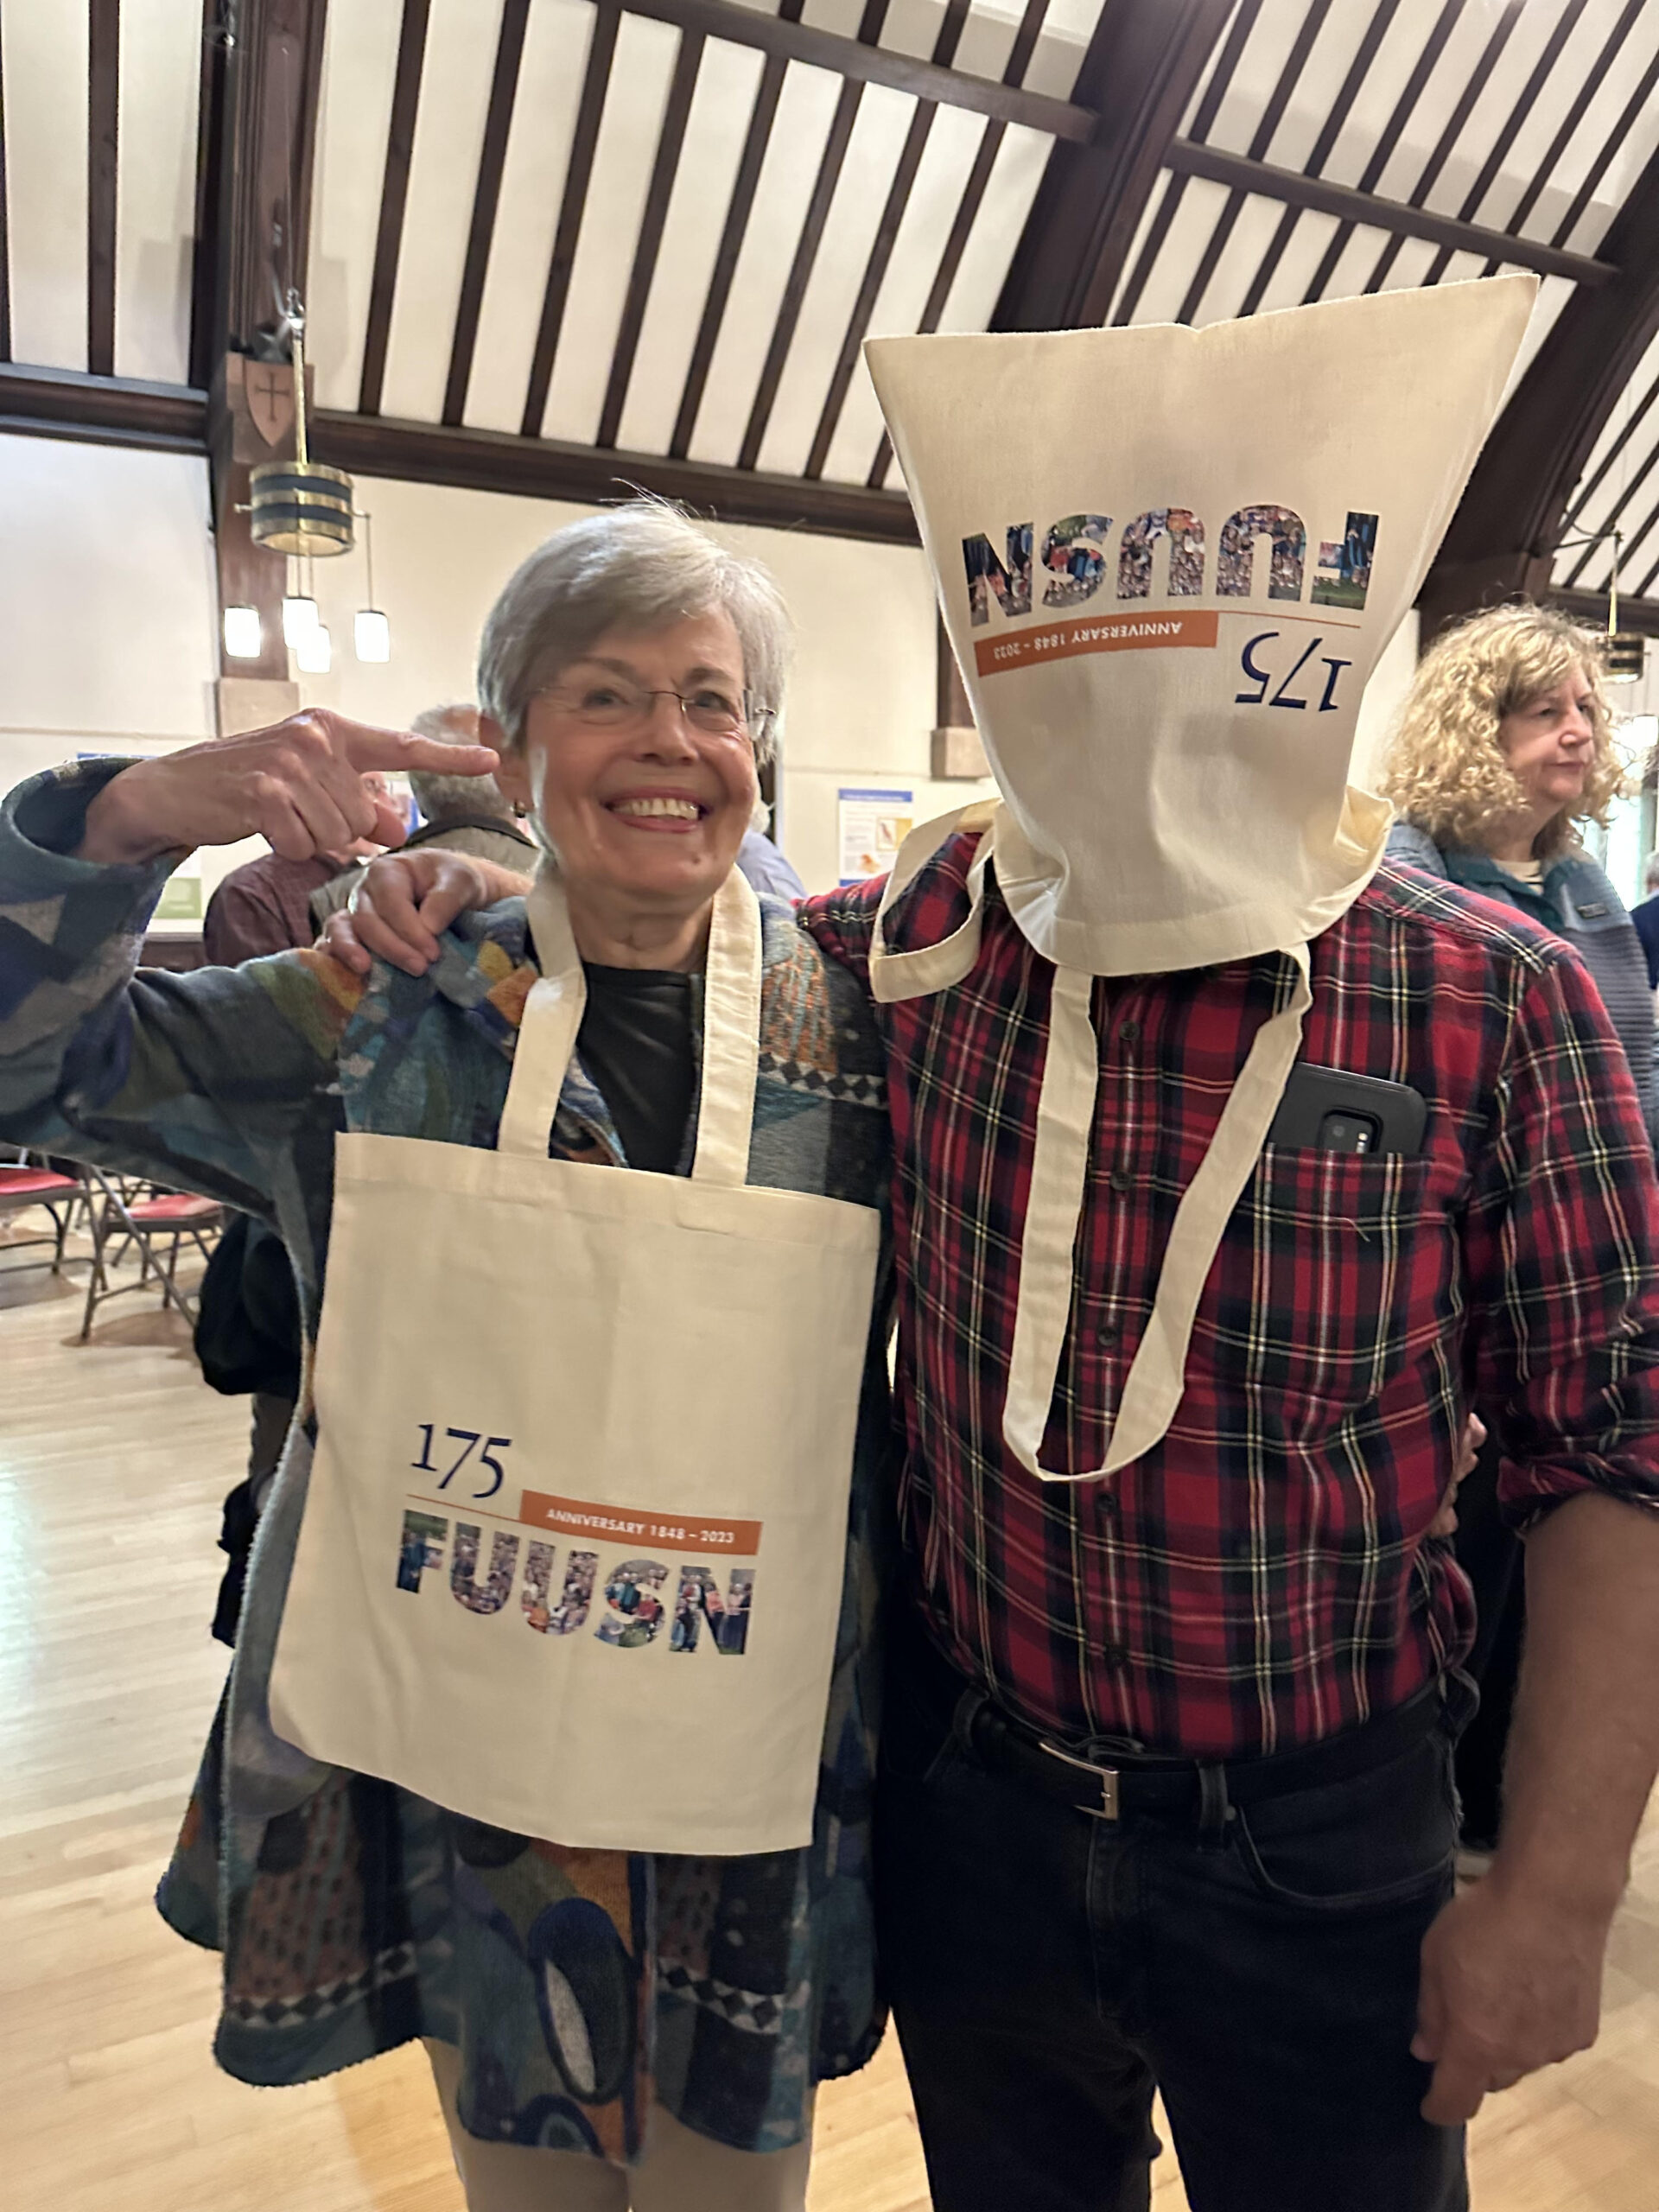 A man demonstrates a novel use for a 175th Anniversary tote bag by wearing it on his head. A woman next to him, wearing another tote around her neck, smiles and points at the man.